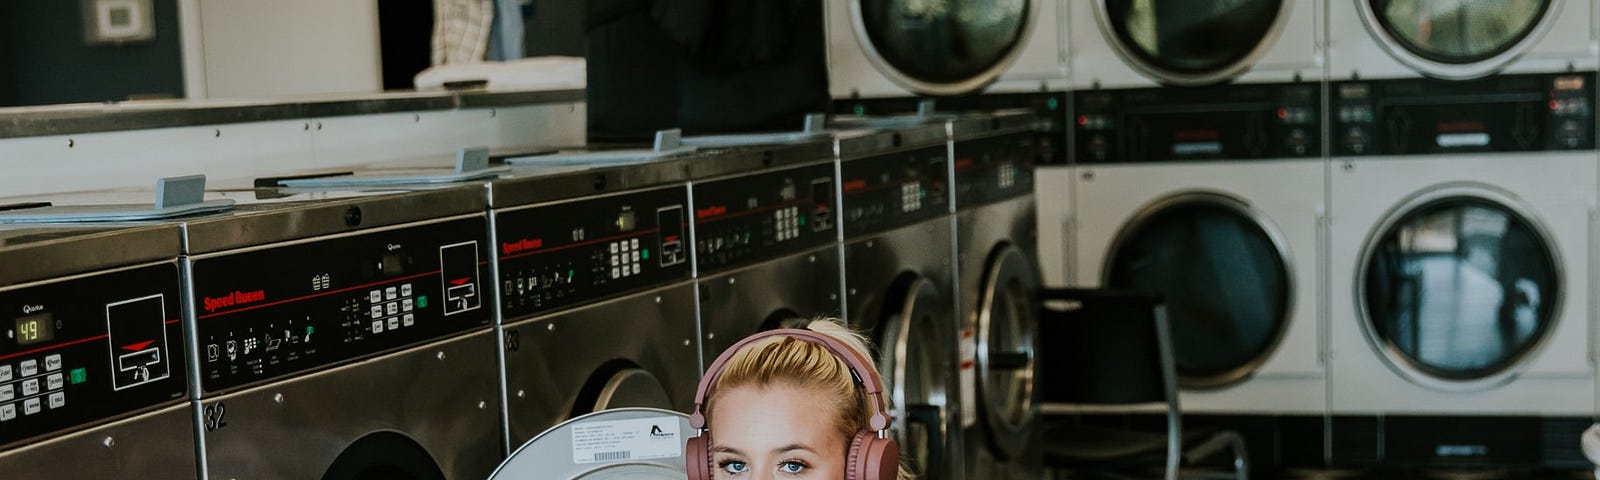 Girl with laundry basket at laundromat